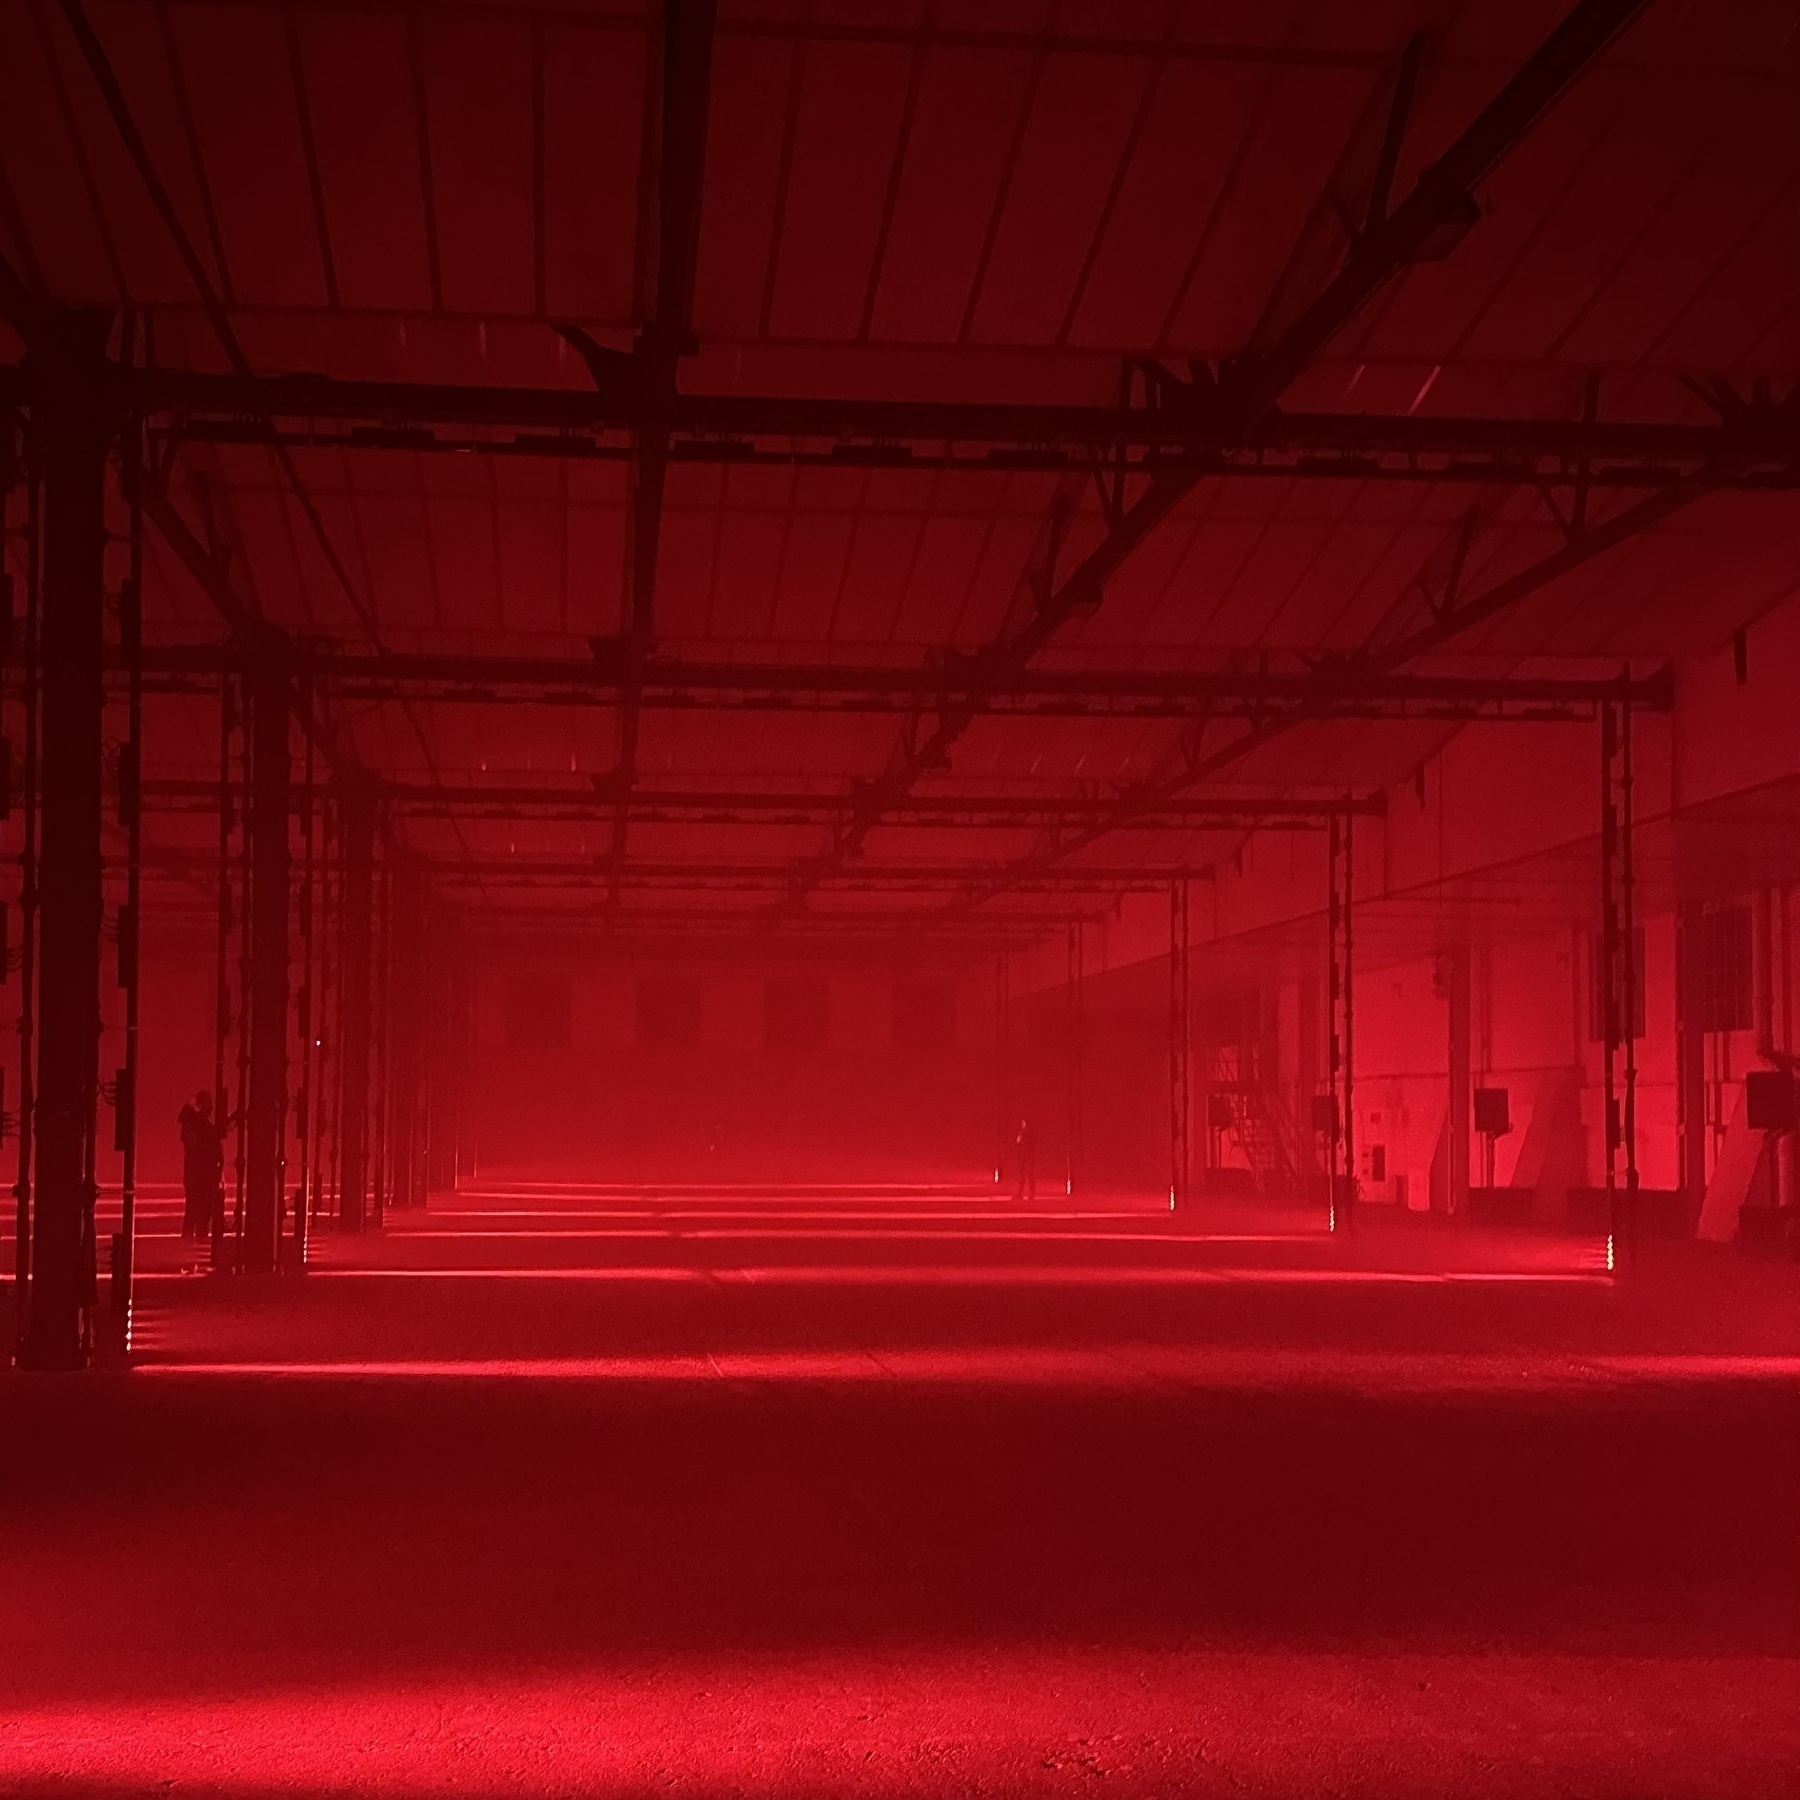 An empty warehouse with haze in the distance, lit with red light.